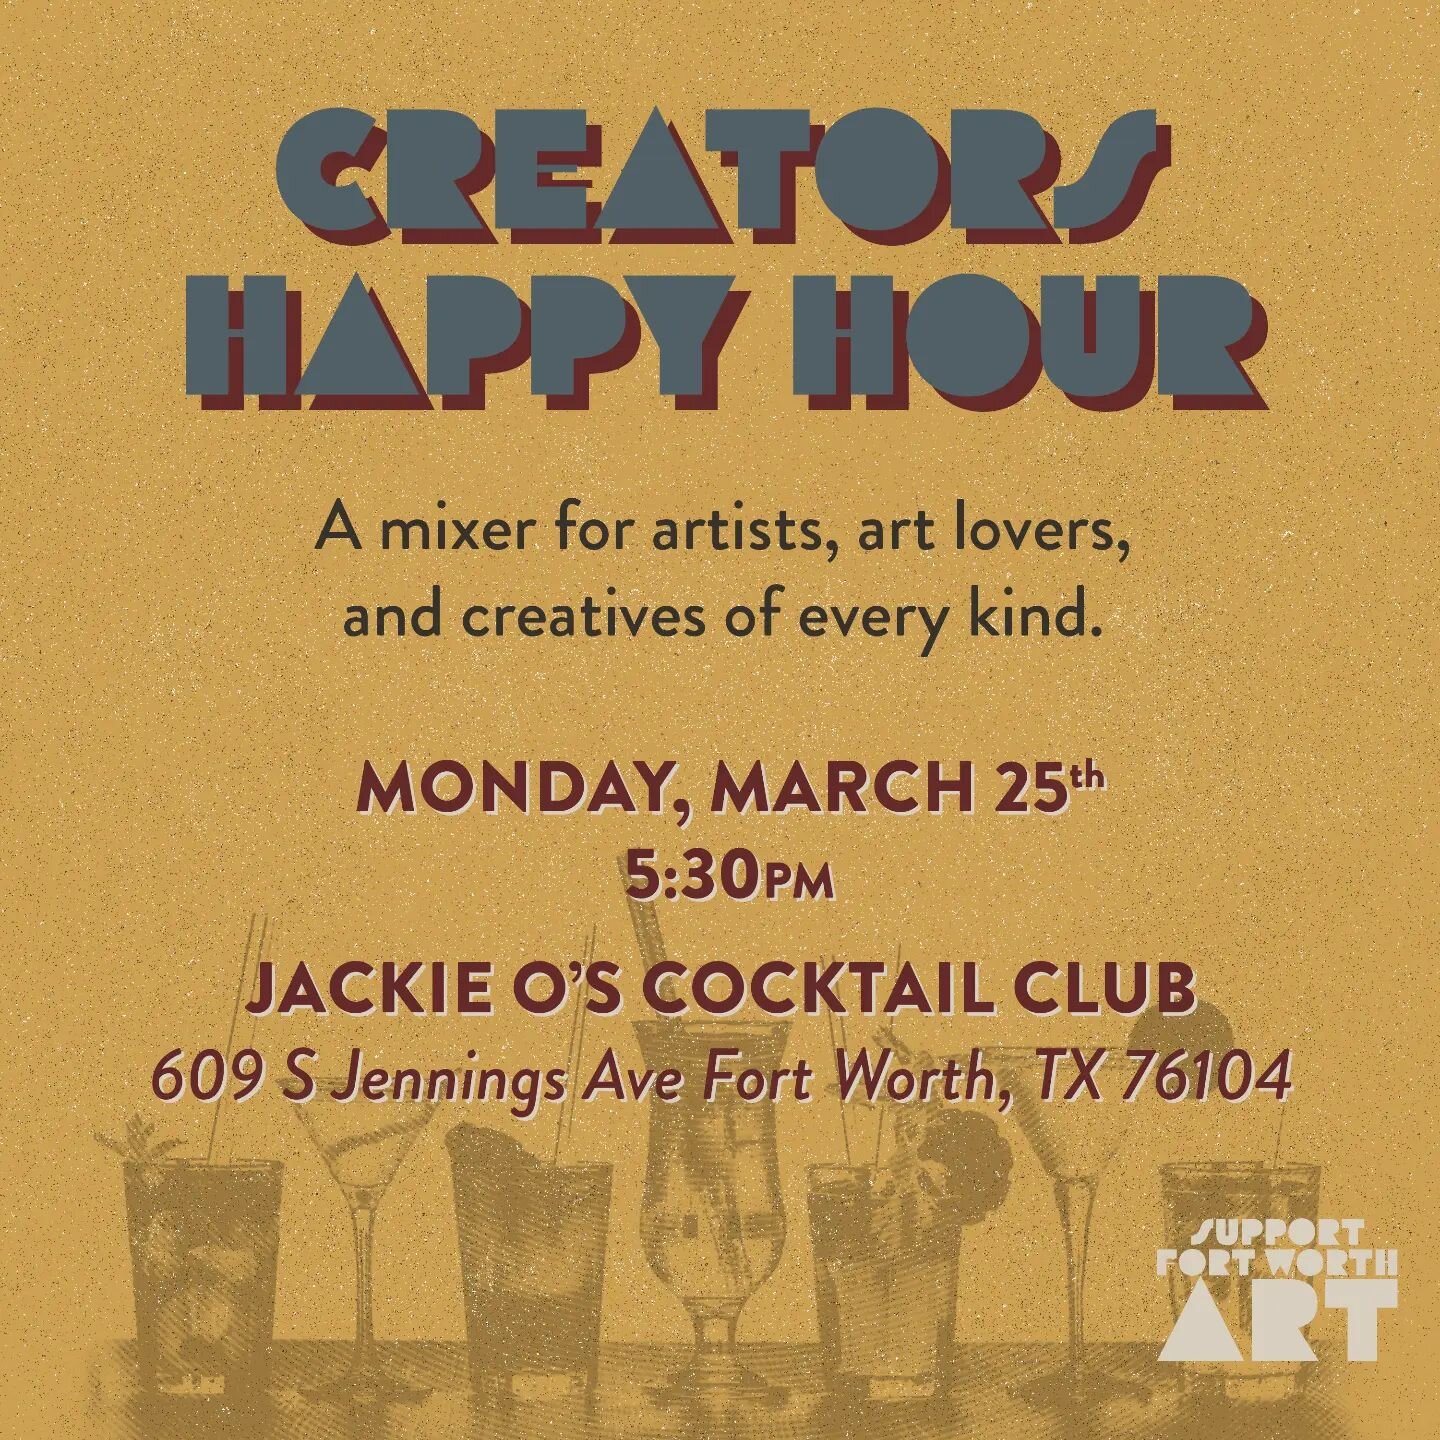 Join us next week at another Creators Happy Hour at Jackie O's! Meet more artists, art lovers, and creative thinkers. Looking forward to seeing you there!